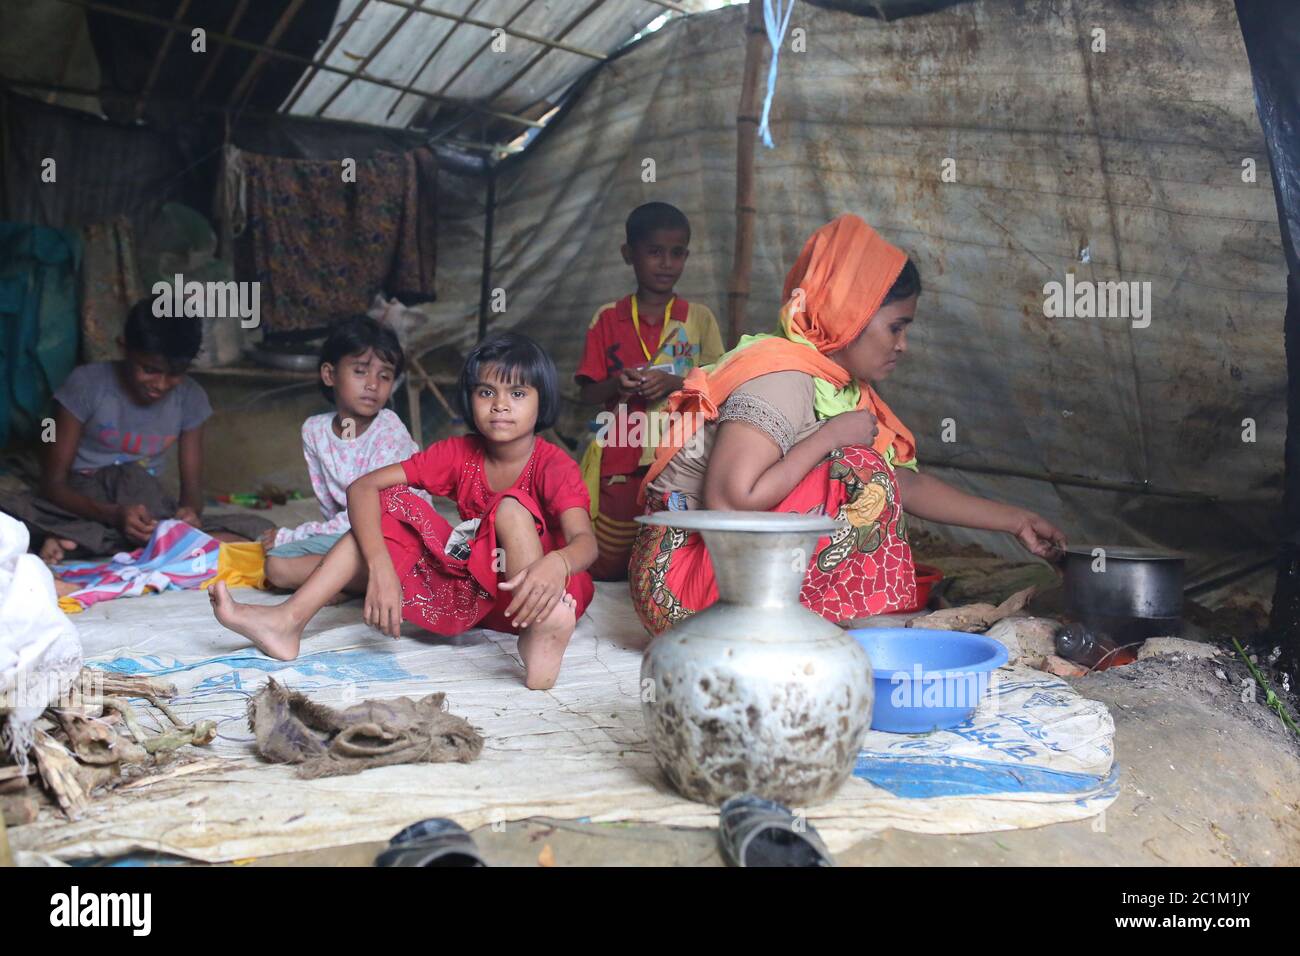 A Rohingya other cooks food inside a makeshift tent at Kutupalong refugee camp, Bangladesh, Tuesday, Oct. 03, 2017. Stock Photo